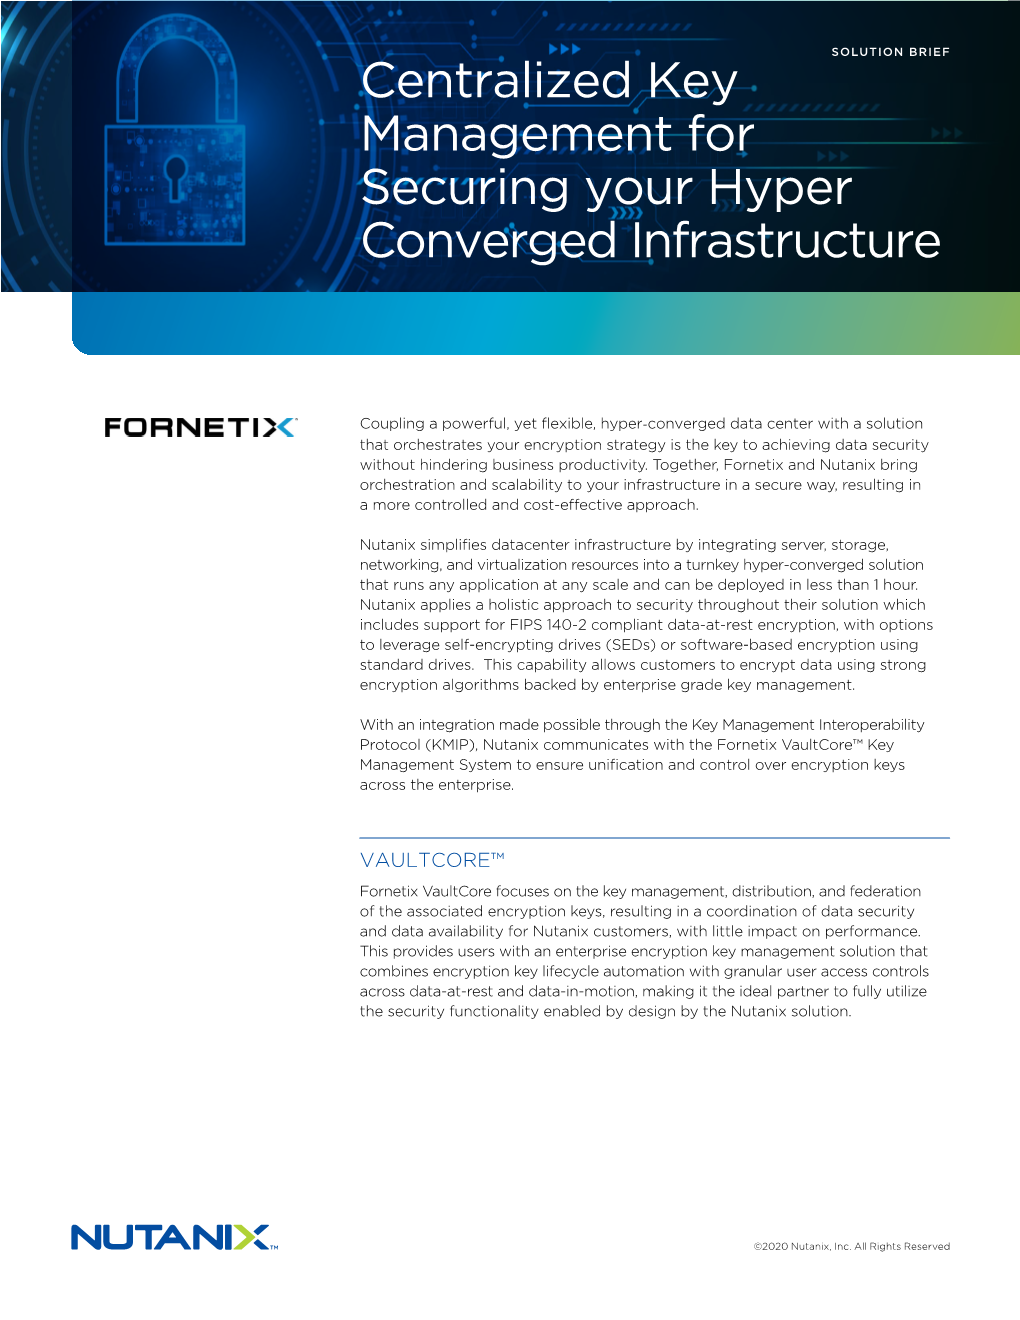 Centralized Key Management for Securing Your Hyper Converged Infrastructure